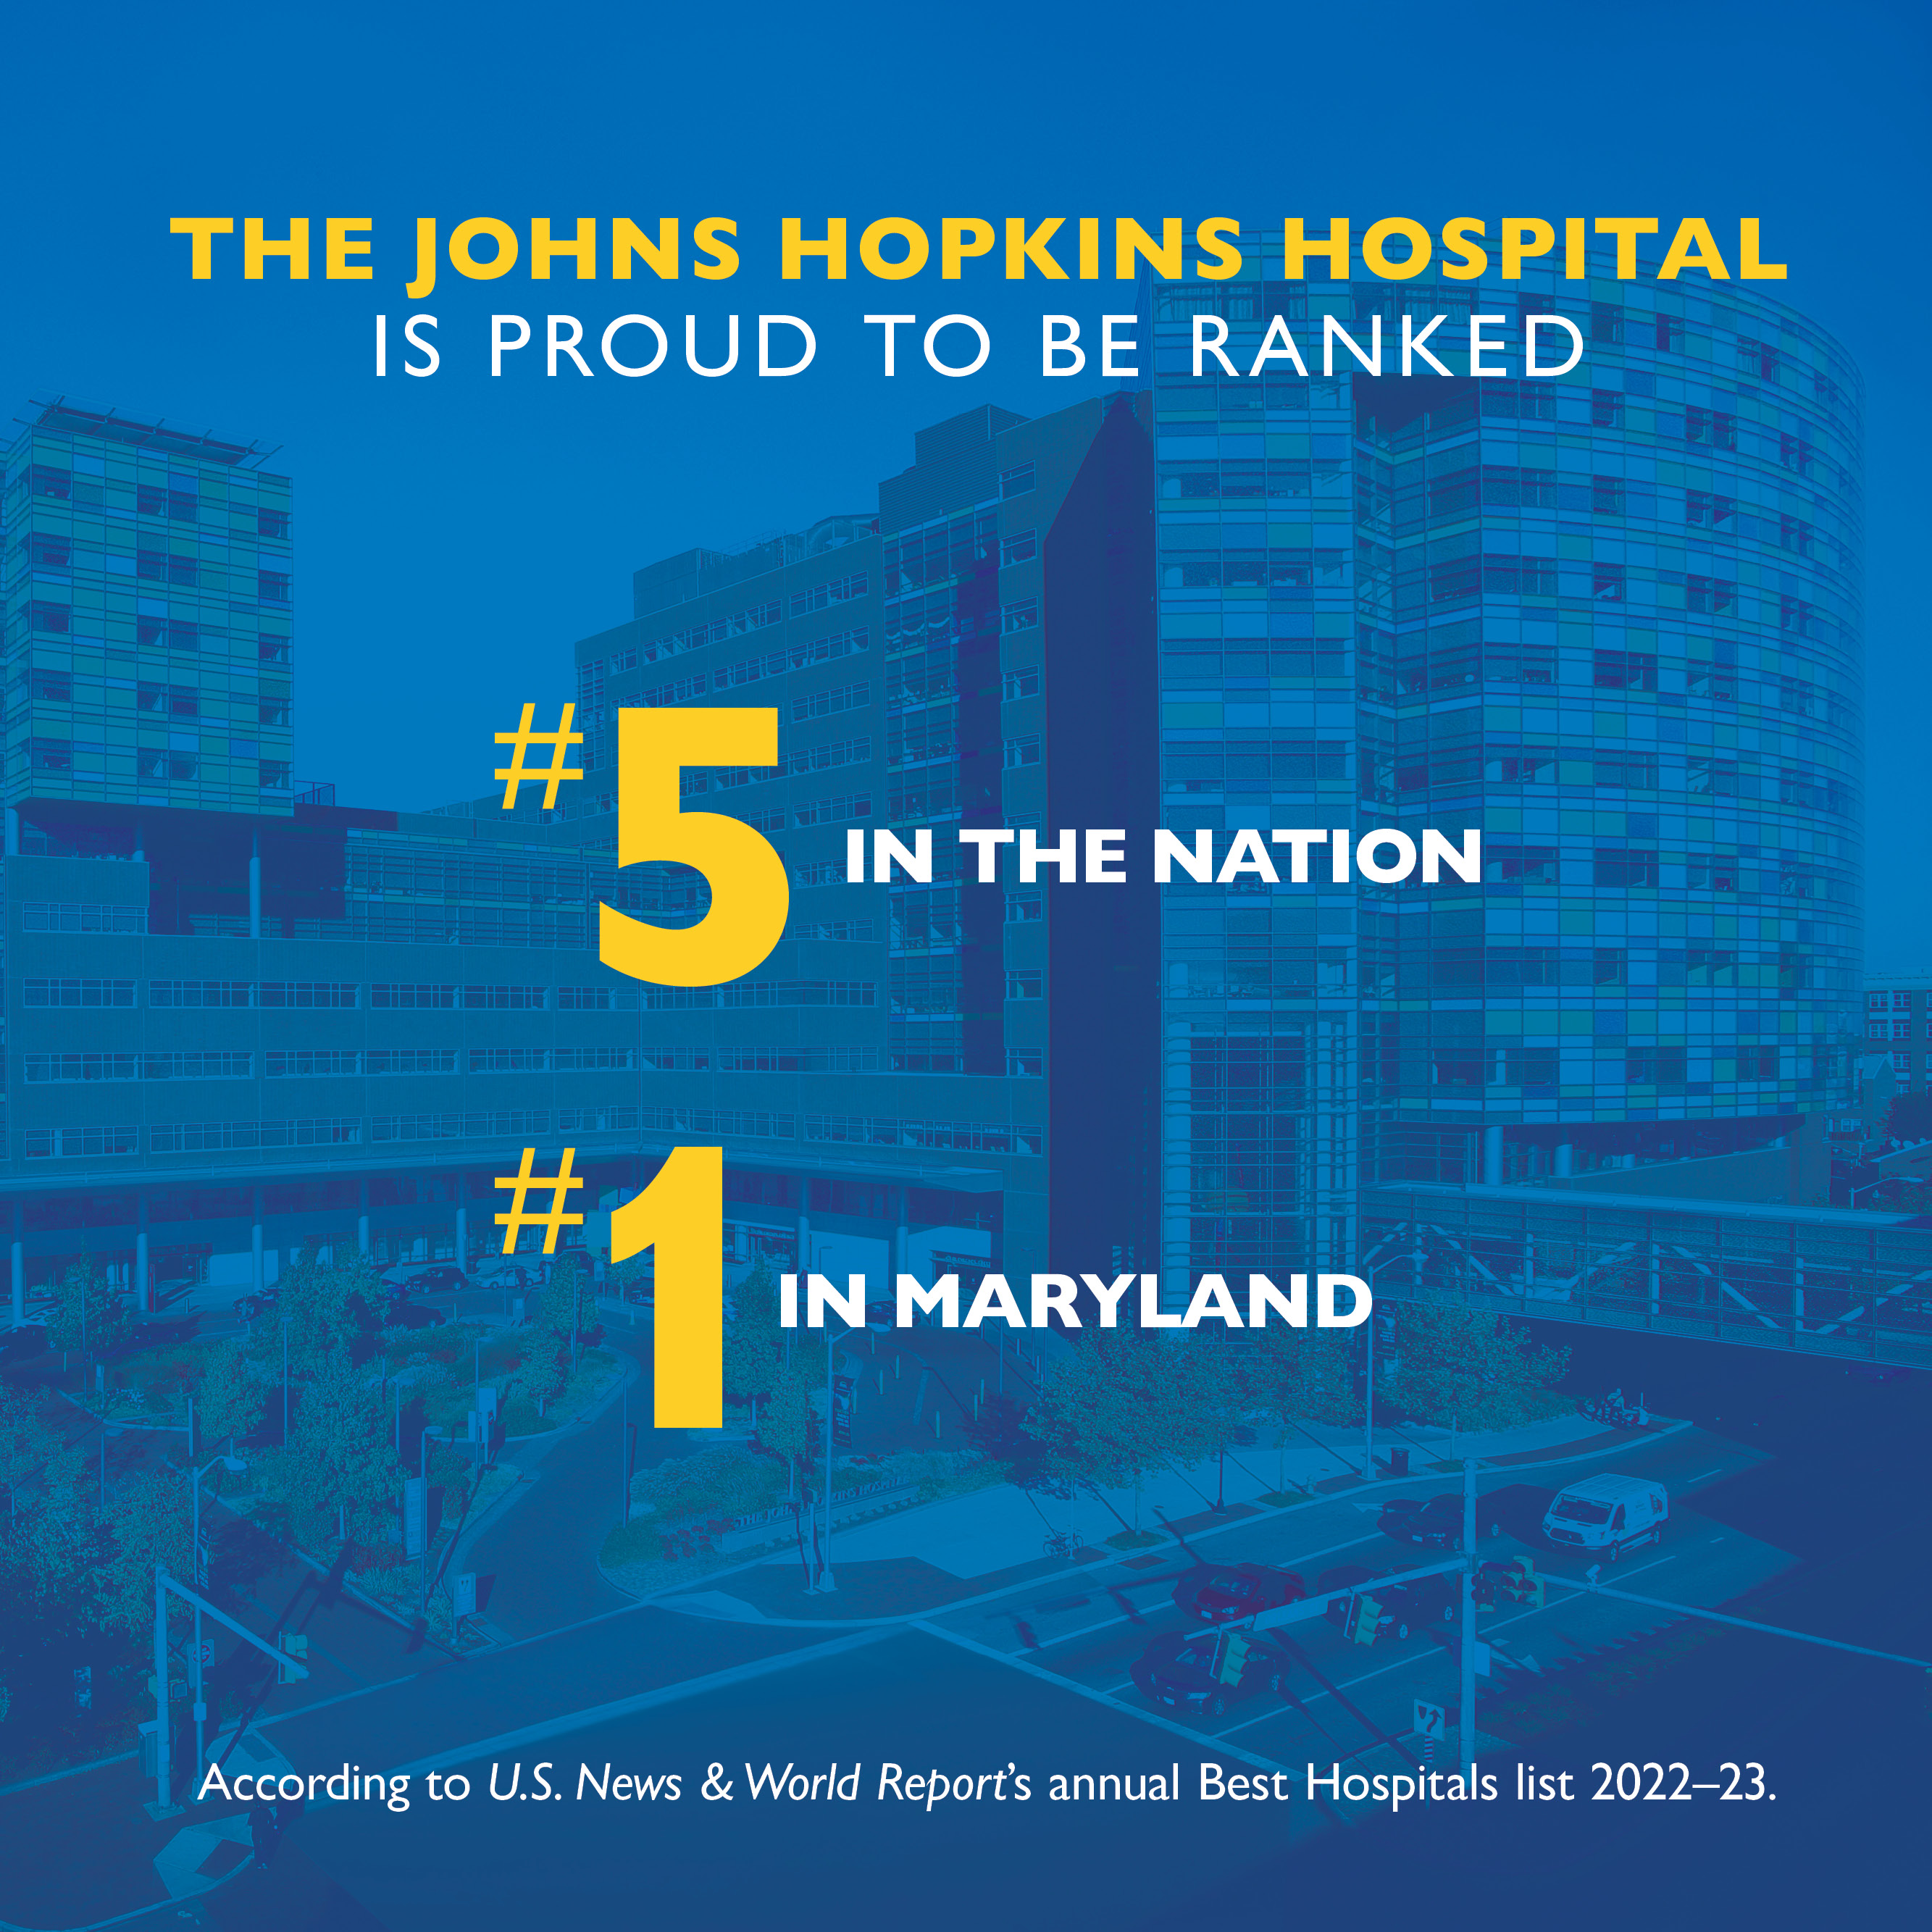 Graphic illustration states that, according to U.S. News and World Report's annual Best Hospitals list 2022-23, The John Hopkins Hospital is #5 in the nation and #1 in Maryland.